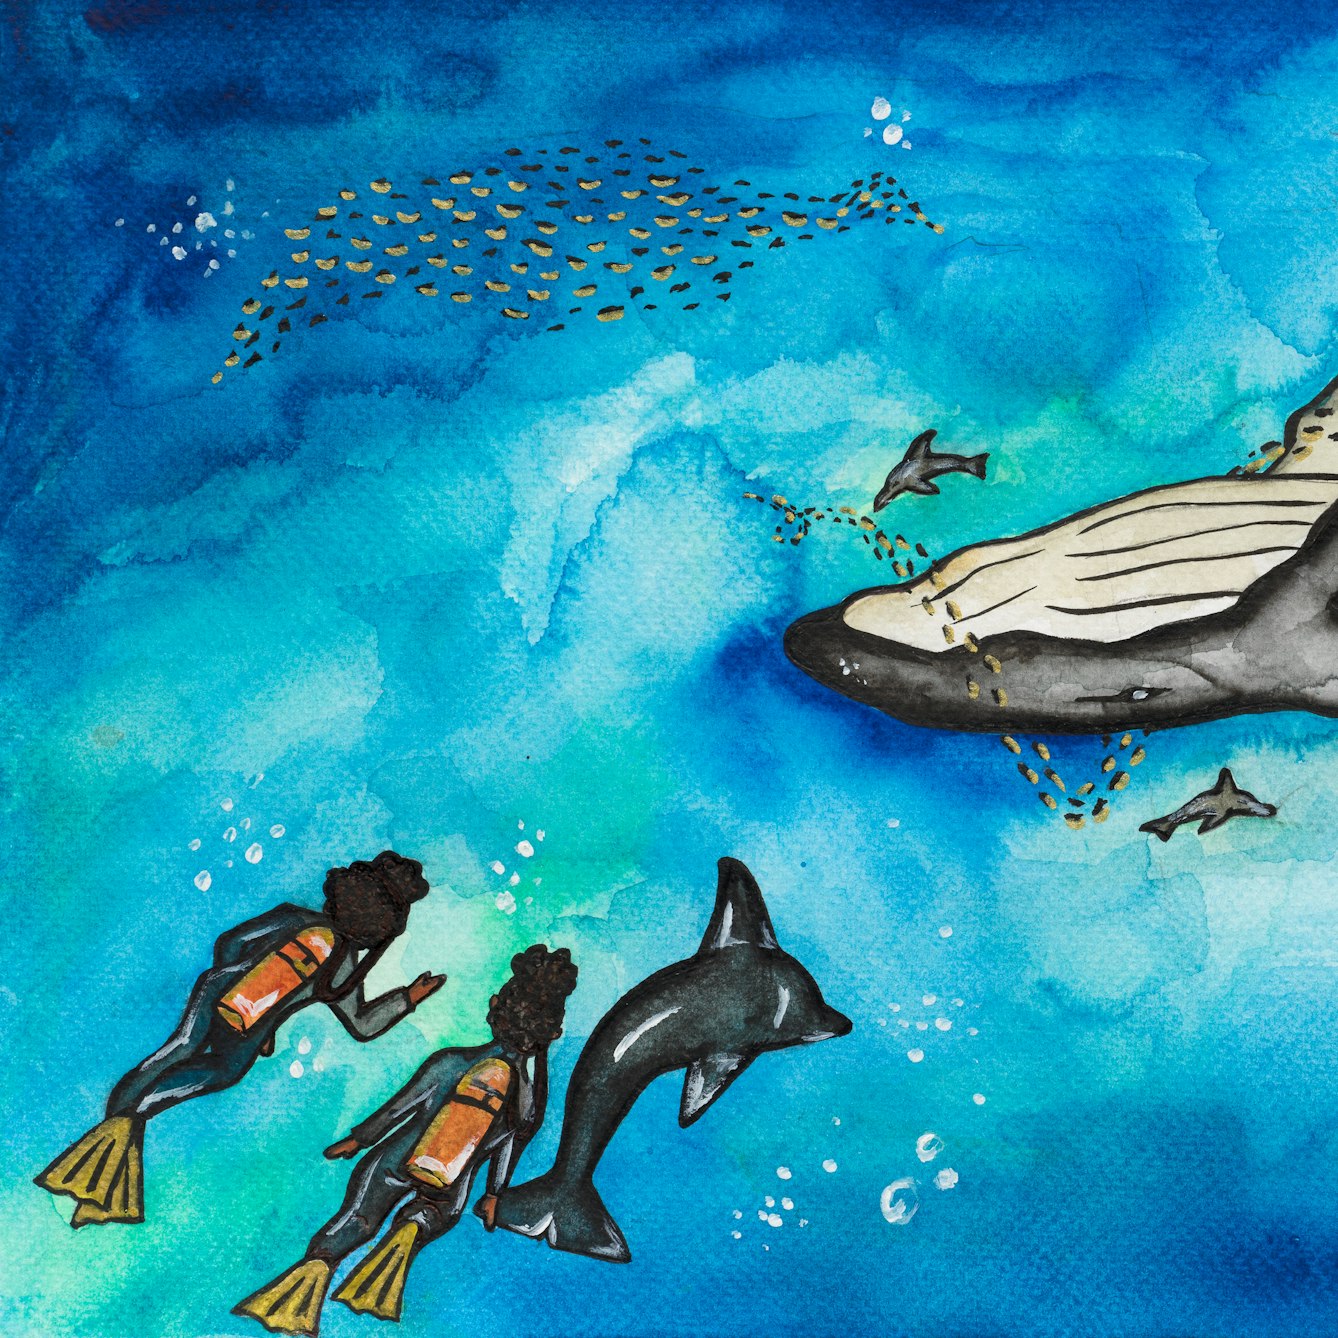 A colourful watercolour artwork. The artwork shows an underwater scene with a whale in the centre. A shoal of small fish are swimming around the whale. There are two other shoals of small fish to the left and the right of the whale. In the bottom left of the scene there are two figures with scuba diving equipment of flippers and oxygen tanks. There is a dolphin swimming alongside them. 